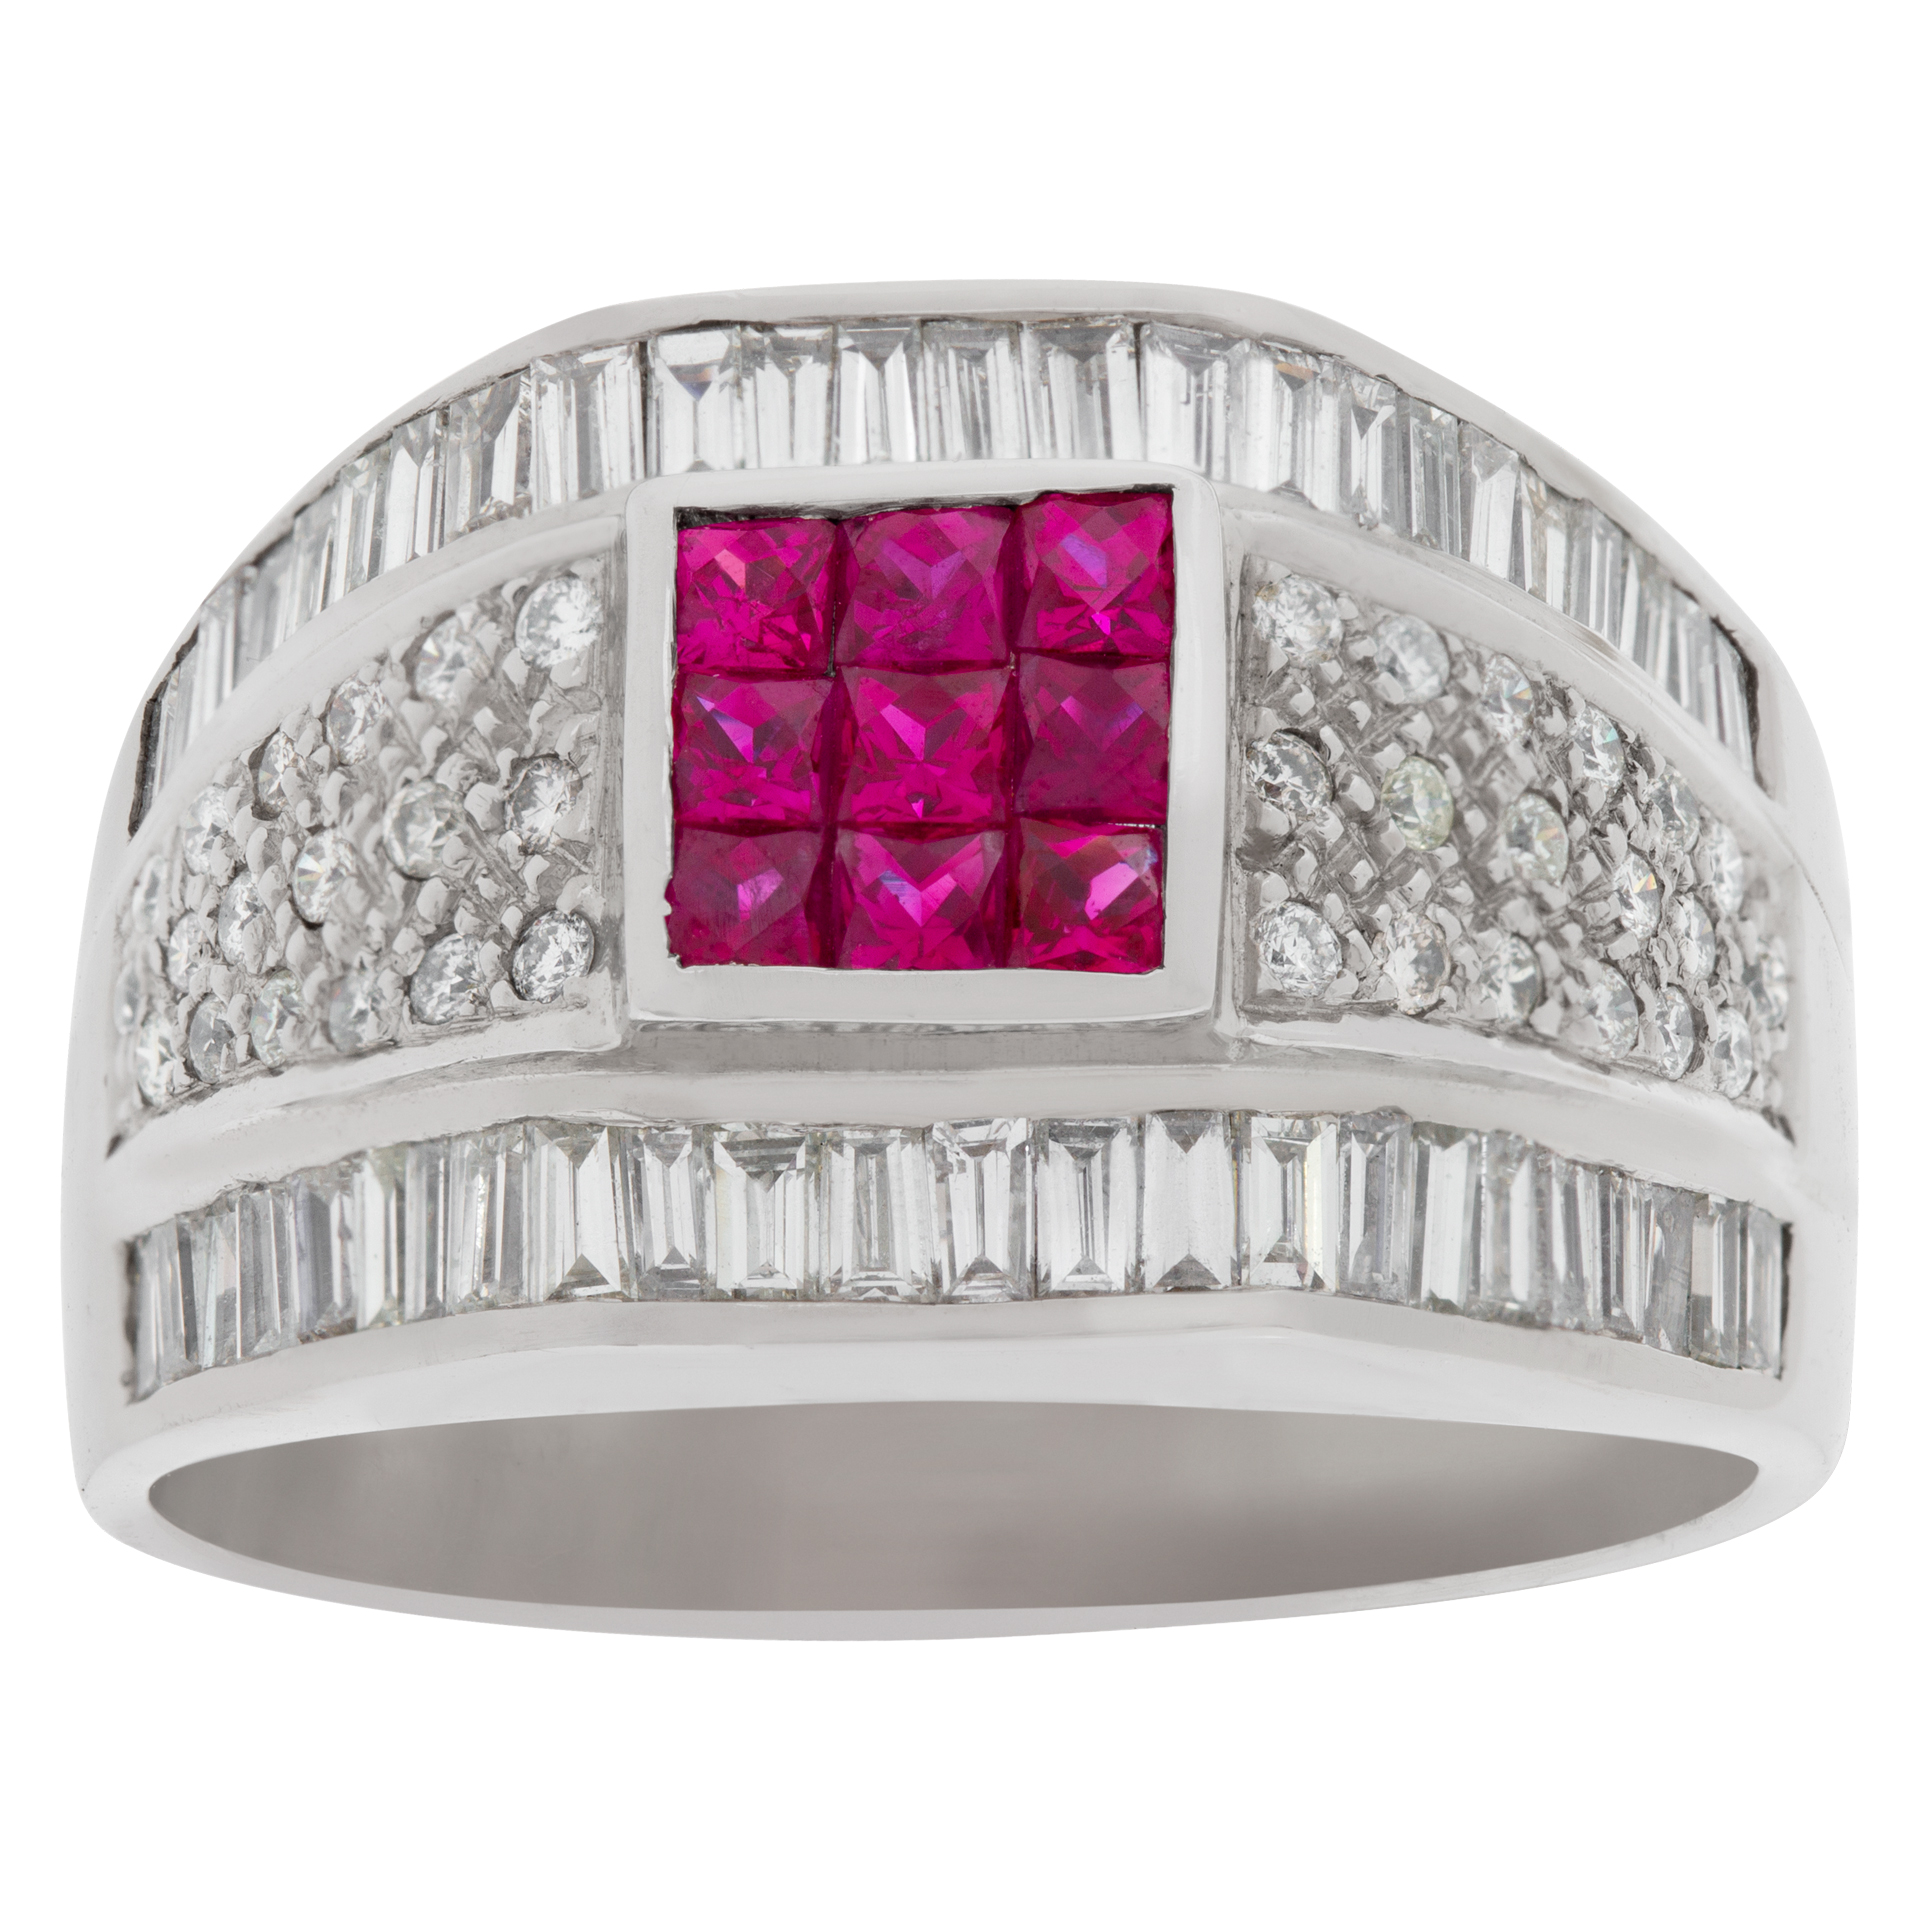 Fancy rubies and diamond ring in 18k white gold. 1.00 carats in diamonds. Size 8.5